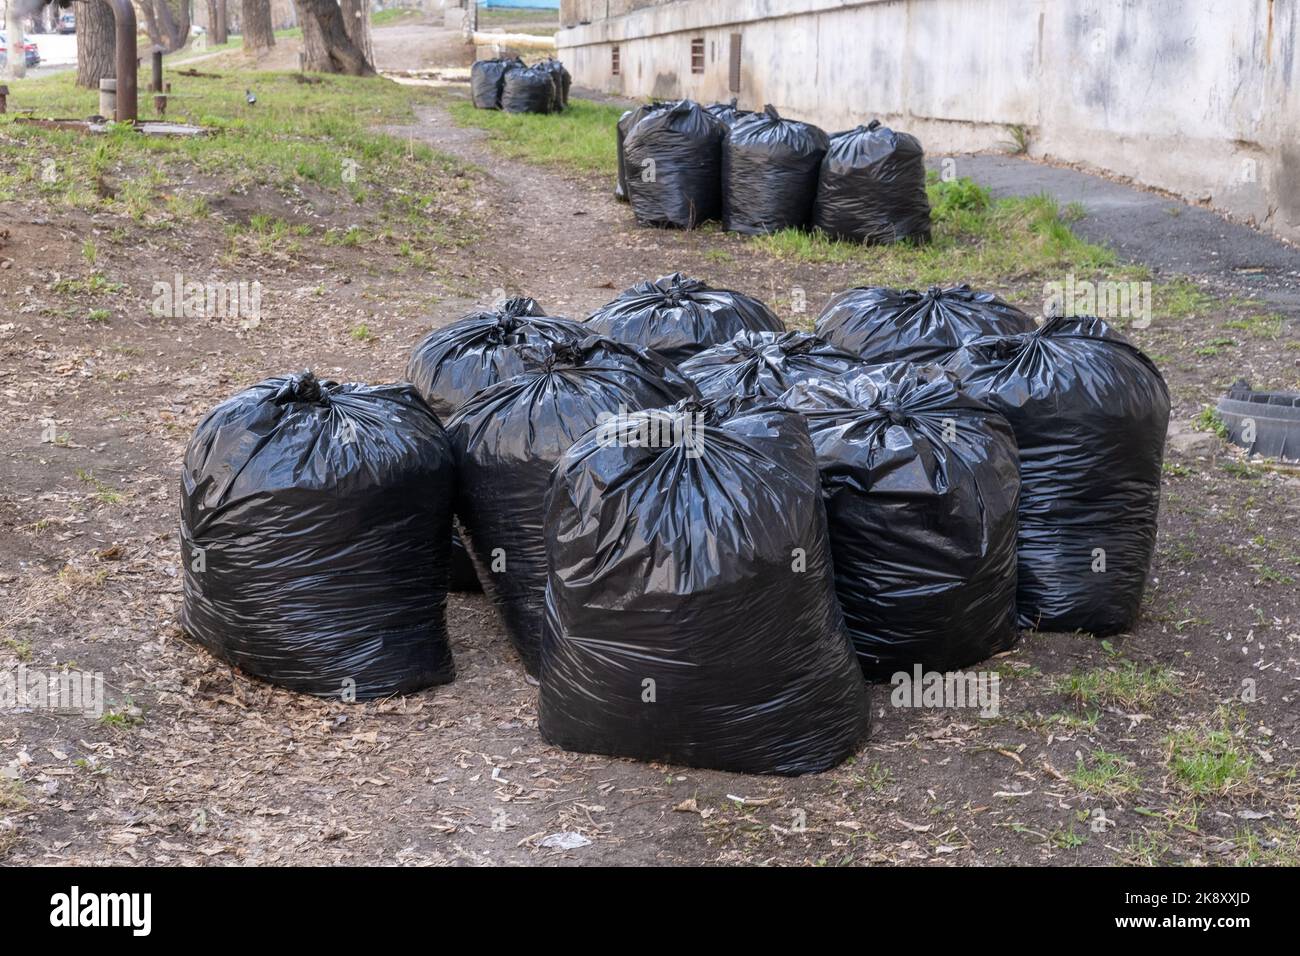 https://c8.alamy.com/comp/2K8XXJD/pile-of-plastic-garbage-bags-on-the-roadside-near-the-city-building-garbage-bags-on-the-street-black-waste-bags-the-concept-of-garbage-collection-2K8XXJD.jpg